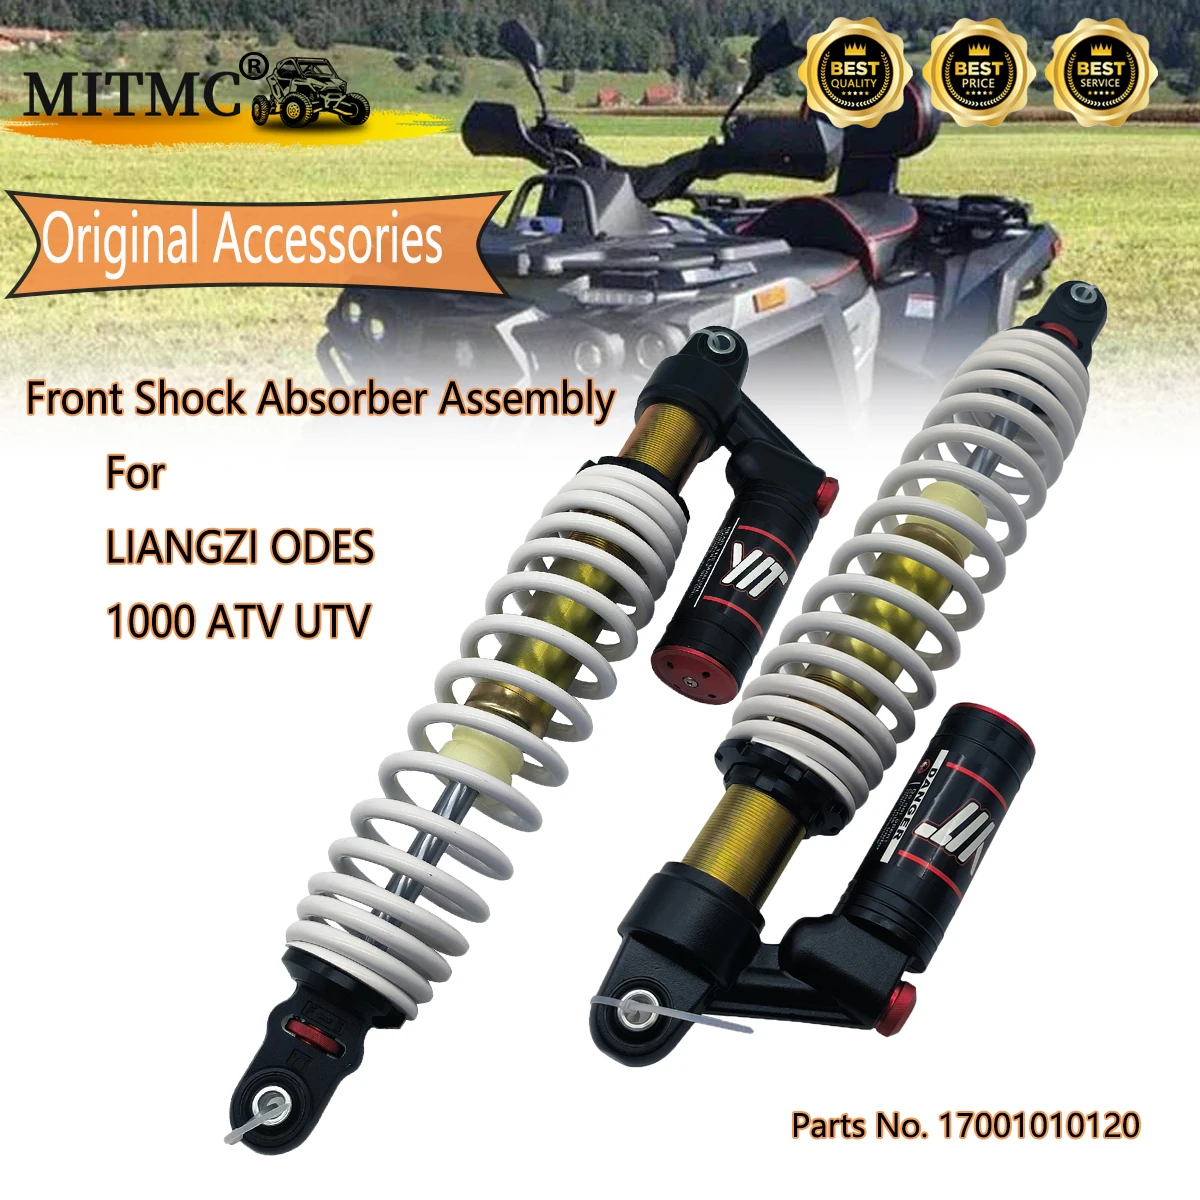 2PCS Front Shock Absorber Assembly For Liangzi Odes 1000 ATV QUAD GO KART Parts No.17001010120 odes liangzi 1000cc front shock absorber oem 17001010120 4x4 quad atv utv parts